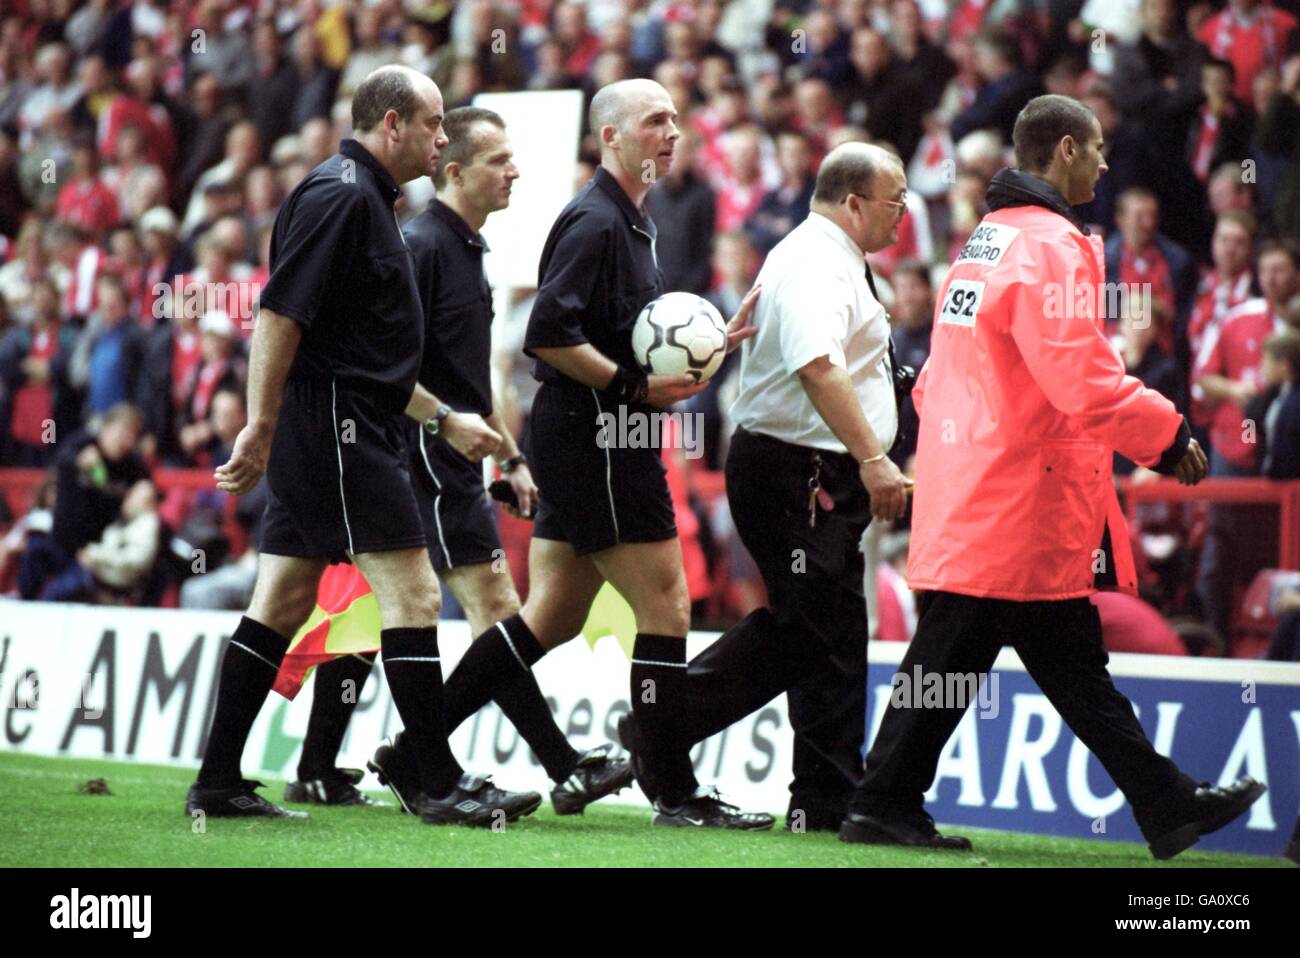 Soccer - FA Barclaycard Premiership - Charlton Athletic v Leicester City. Referee Mike Dean (c) is escorted from the field after the game after several controversial decisions Stock Photo